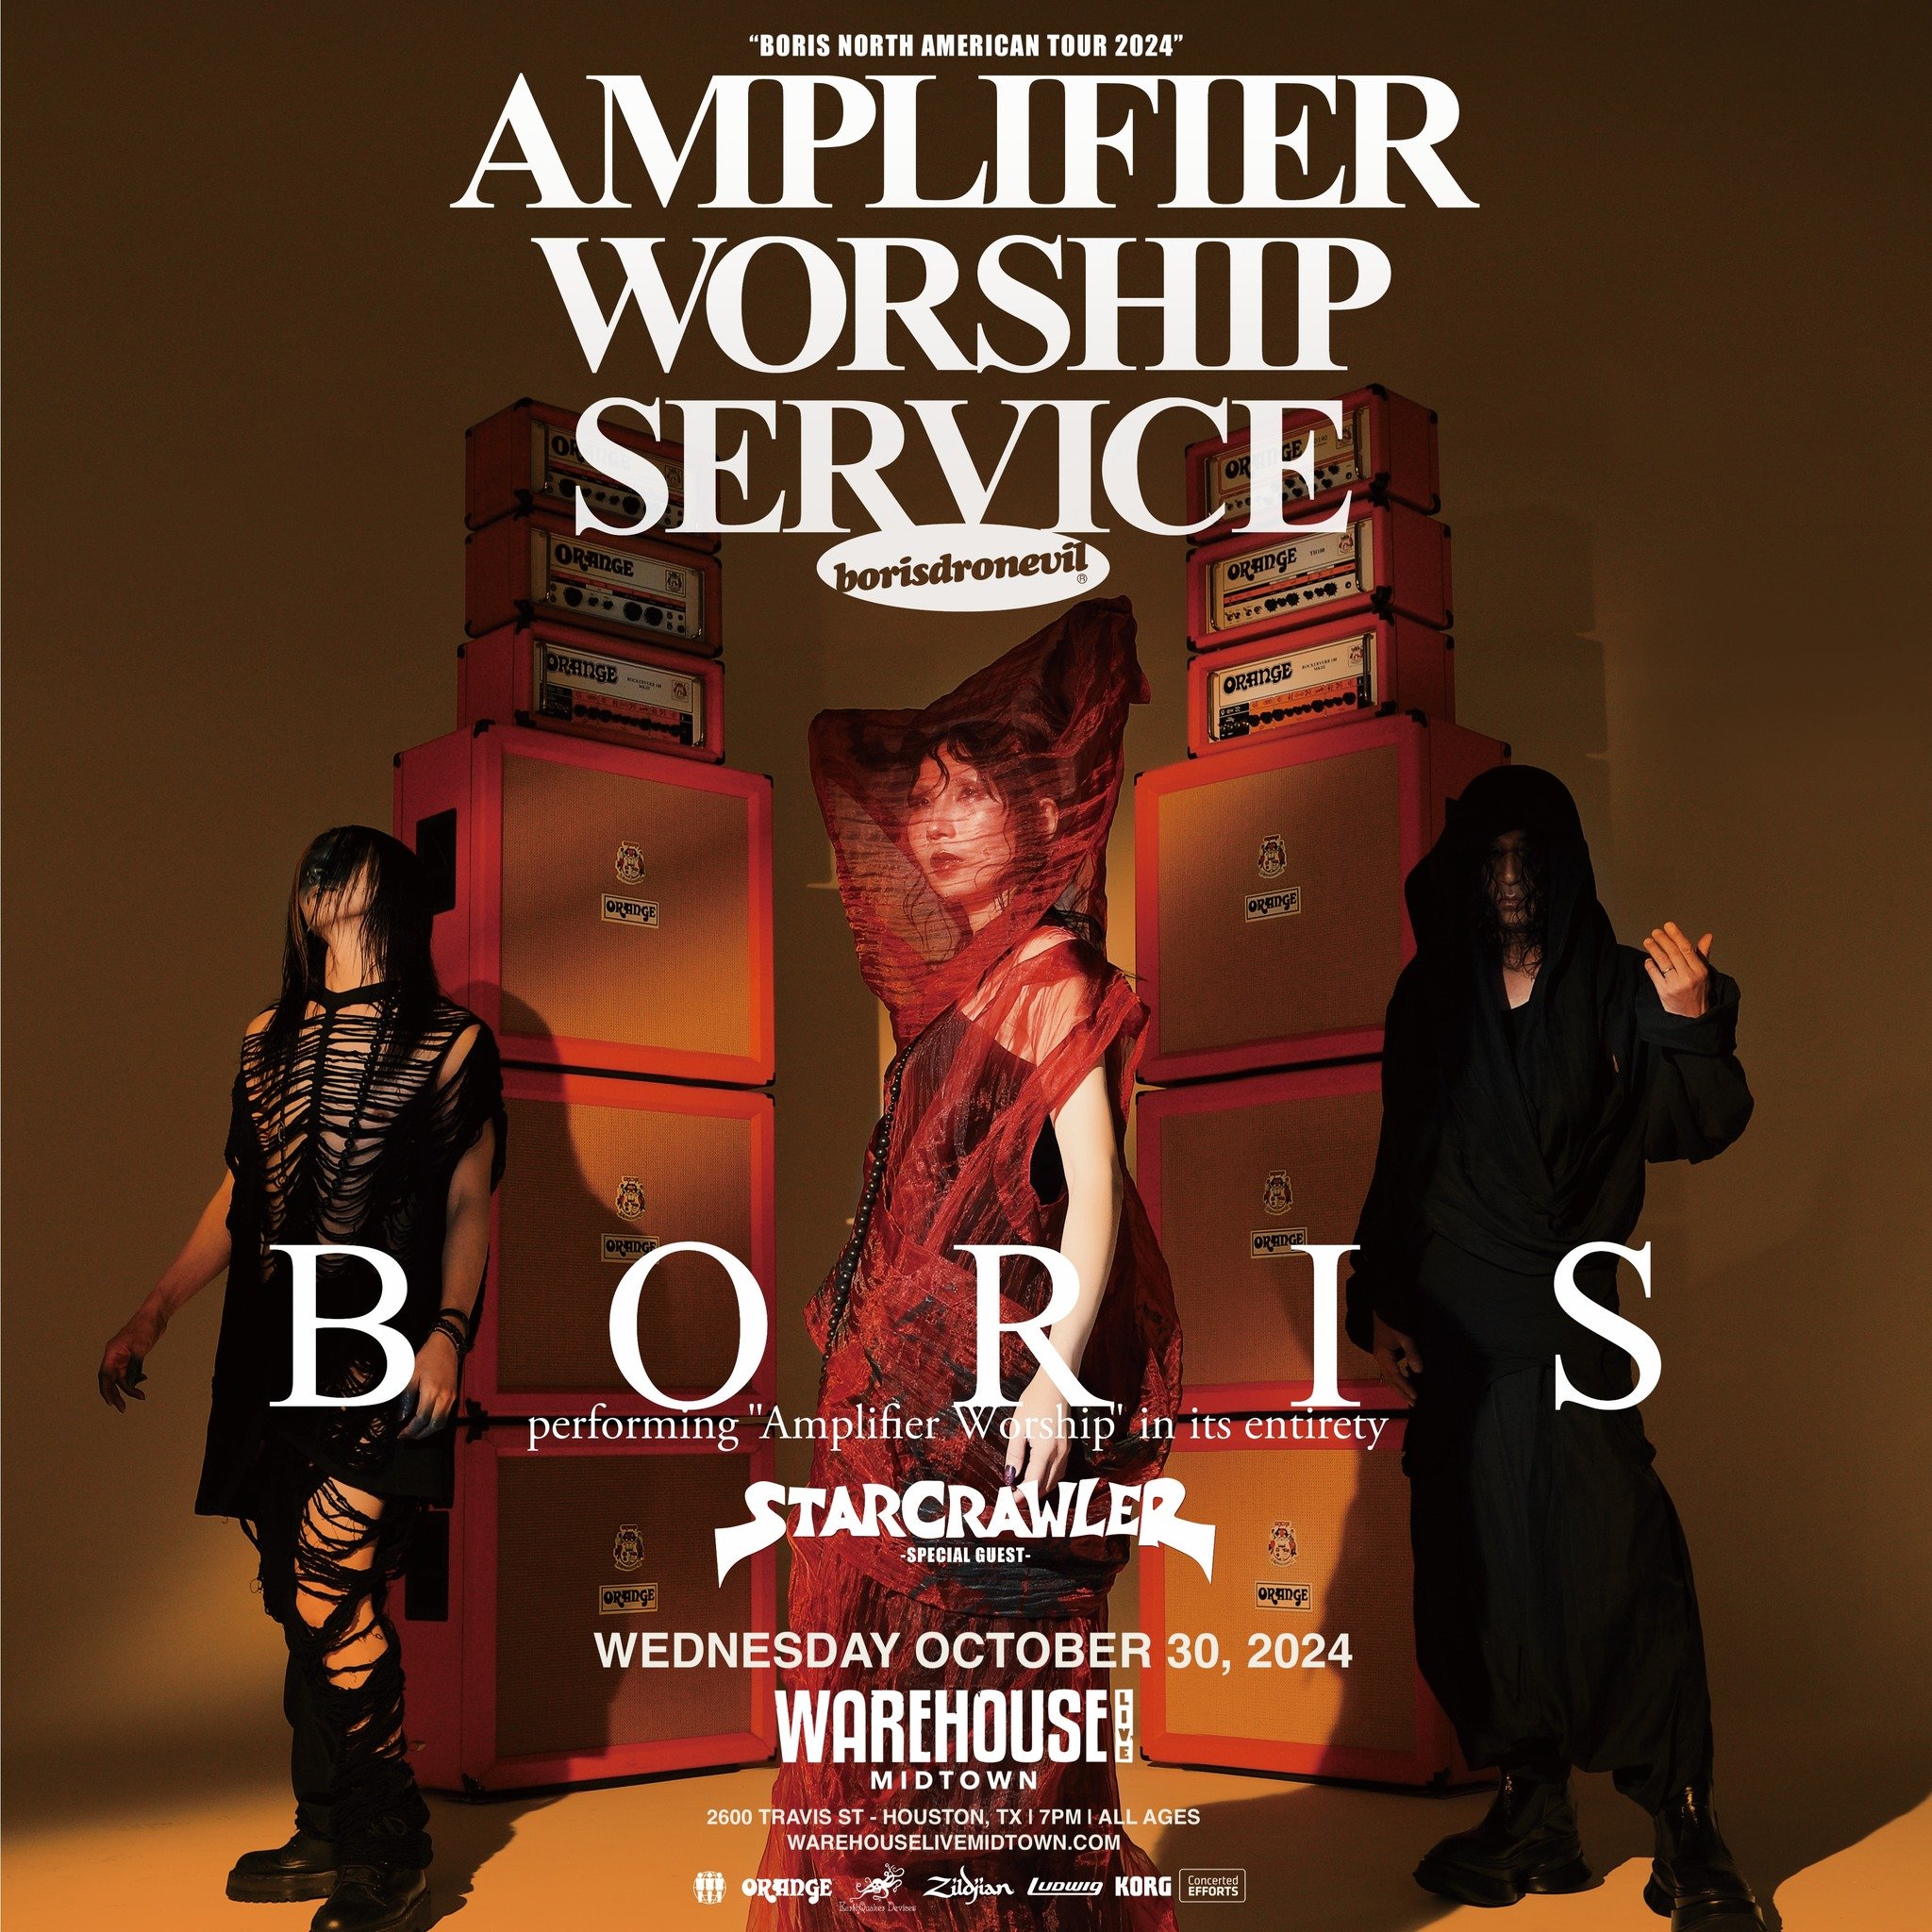 🎸 Boris - Amplifier Worship Service with Starcrawler comes to Houston Wednesday October 30, 2024.  Tickets go on sale this Friday 4/26 at 10am CT. For more information go to warehouselivemidtown.com
.
.
#boris #warehouselive #warehouselivemidtown